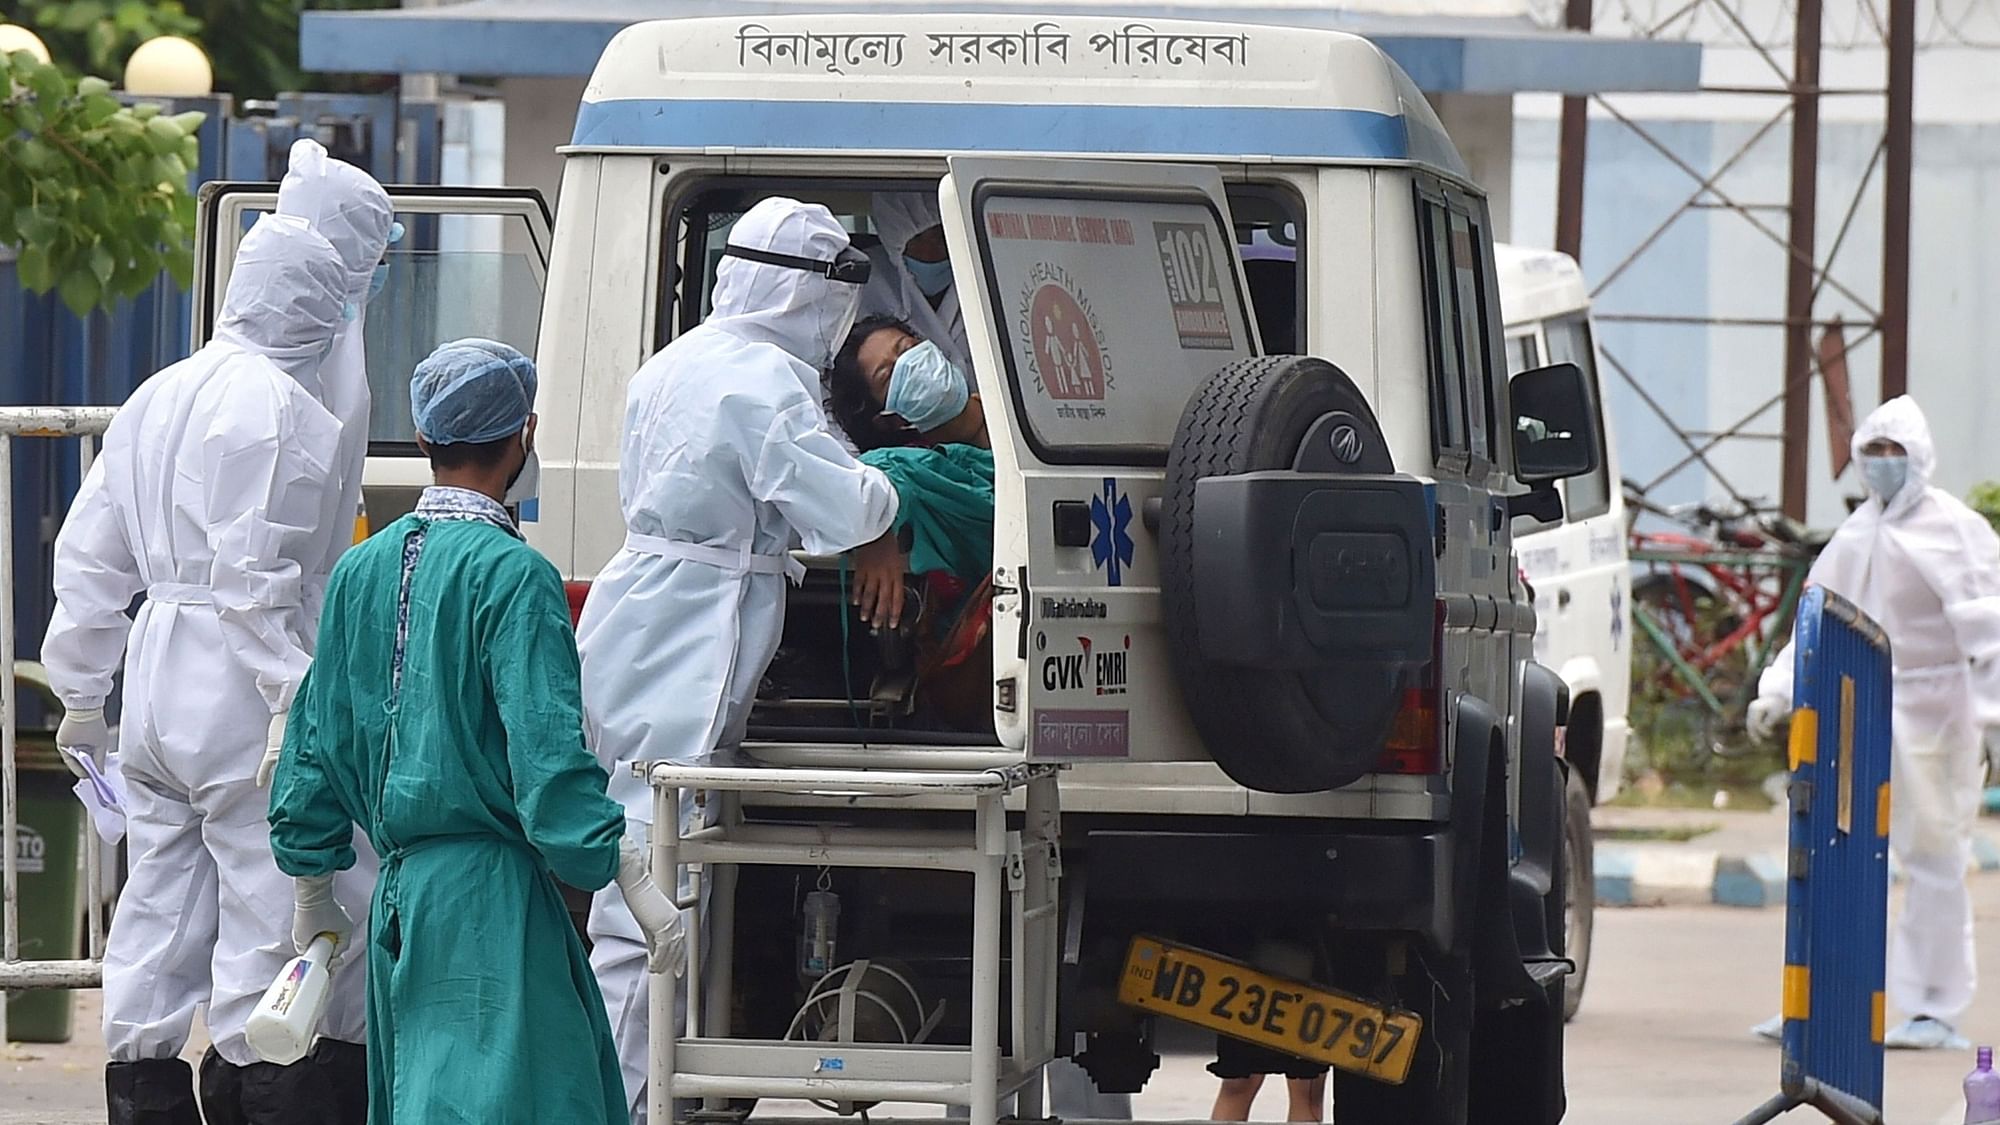 Medics attend to a suspected COVID-19 patient in Kolkata. Image used for representational purposes only.